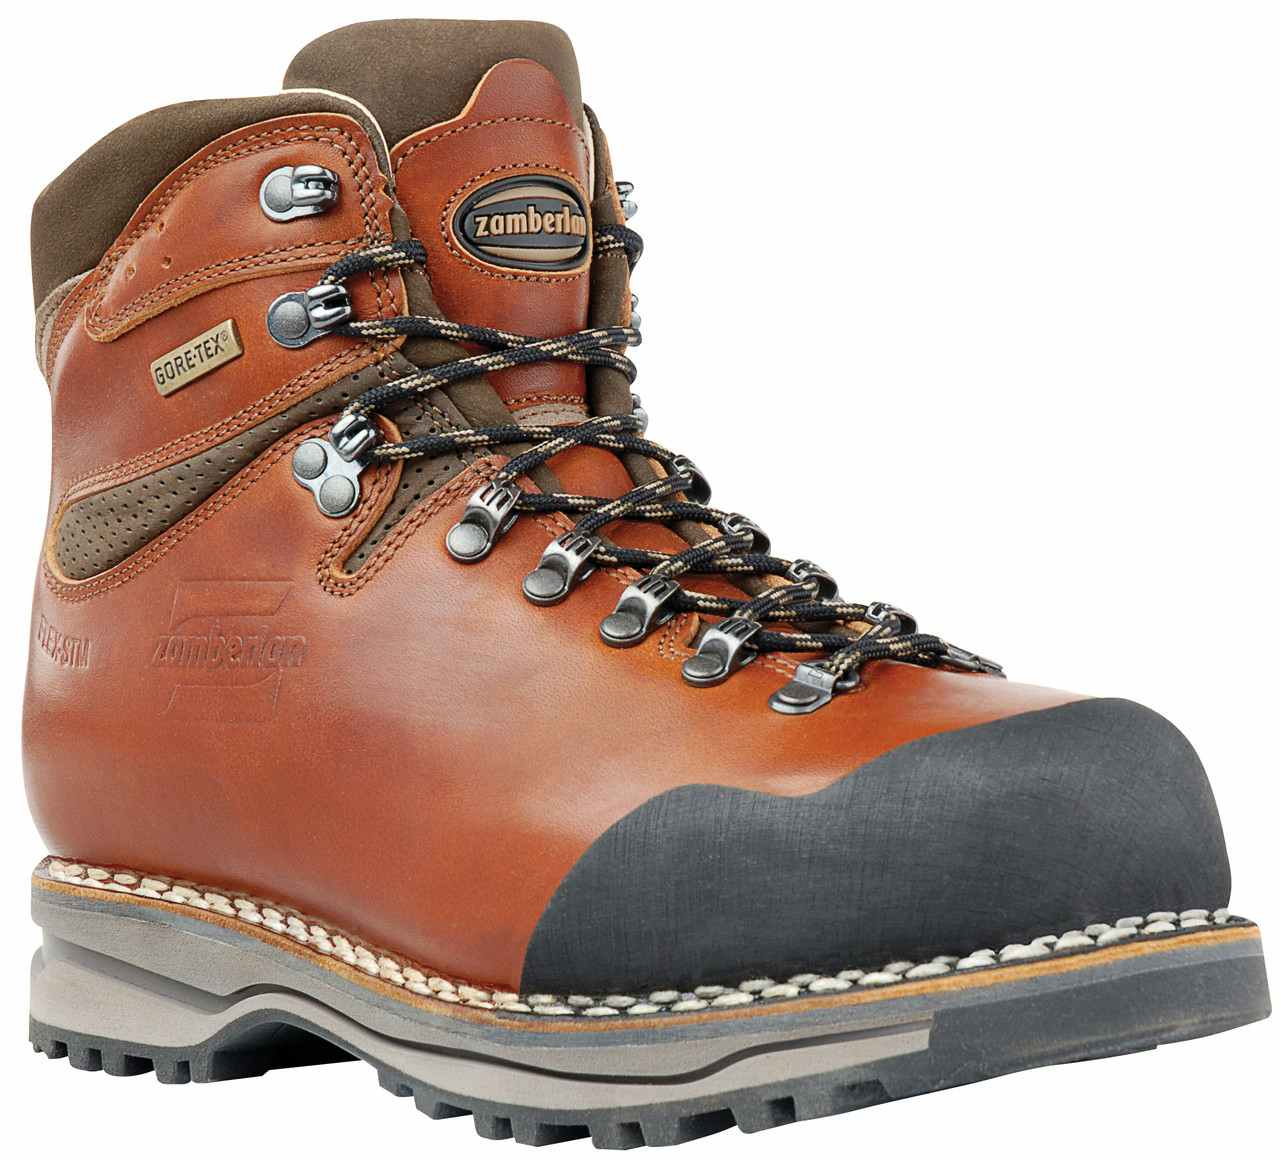 Tofane NW GT Backpacking Boots Waxed Brick